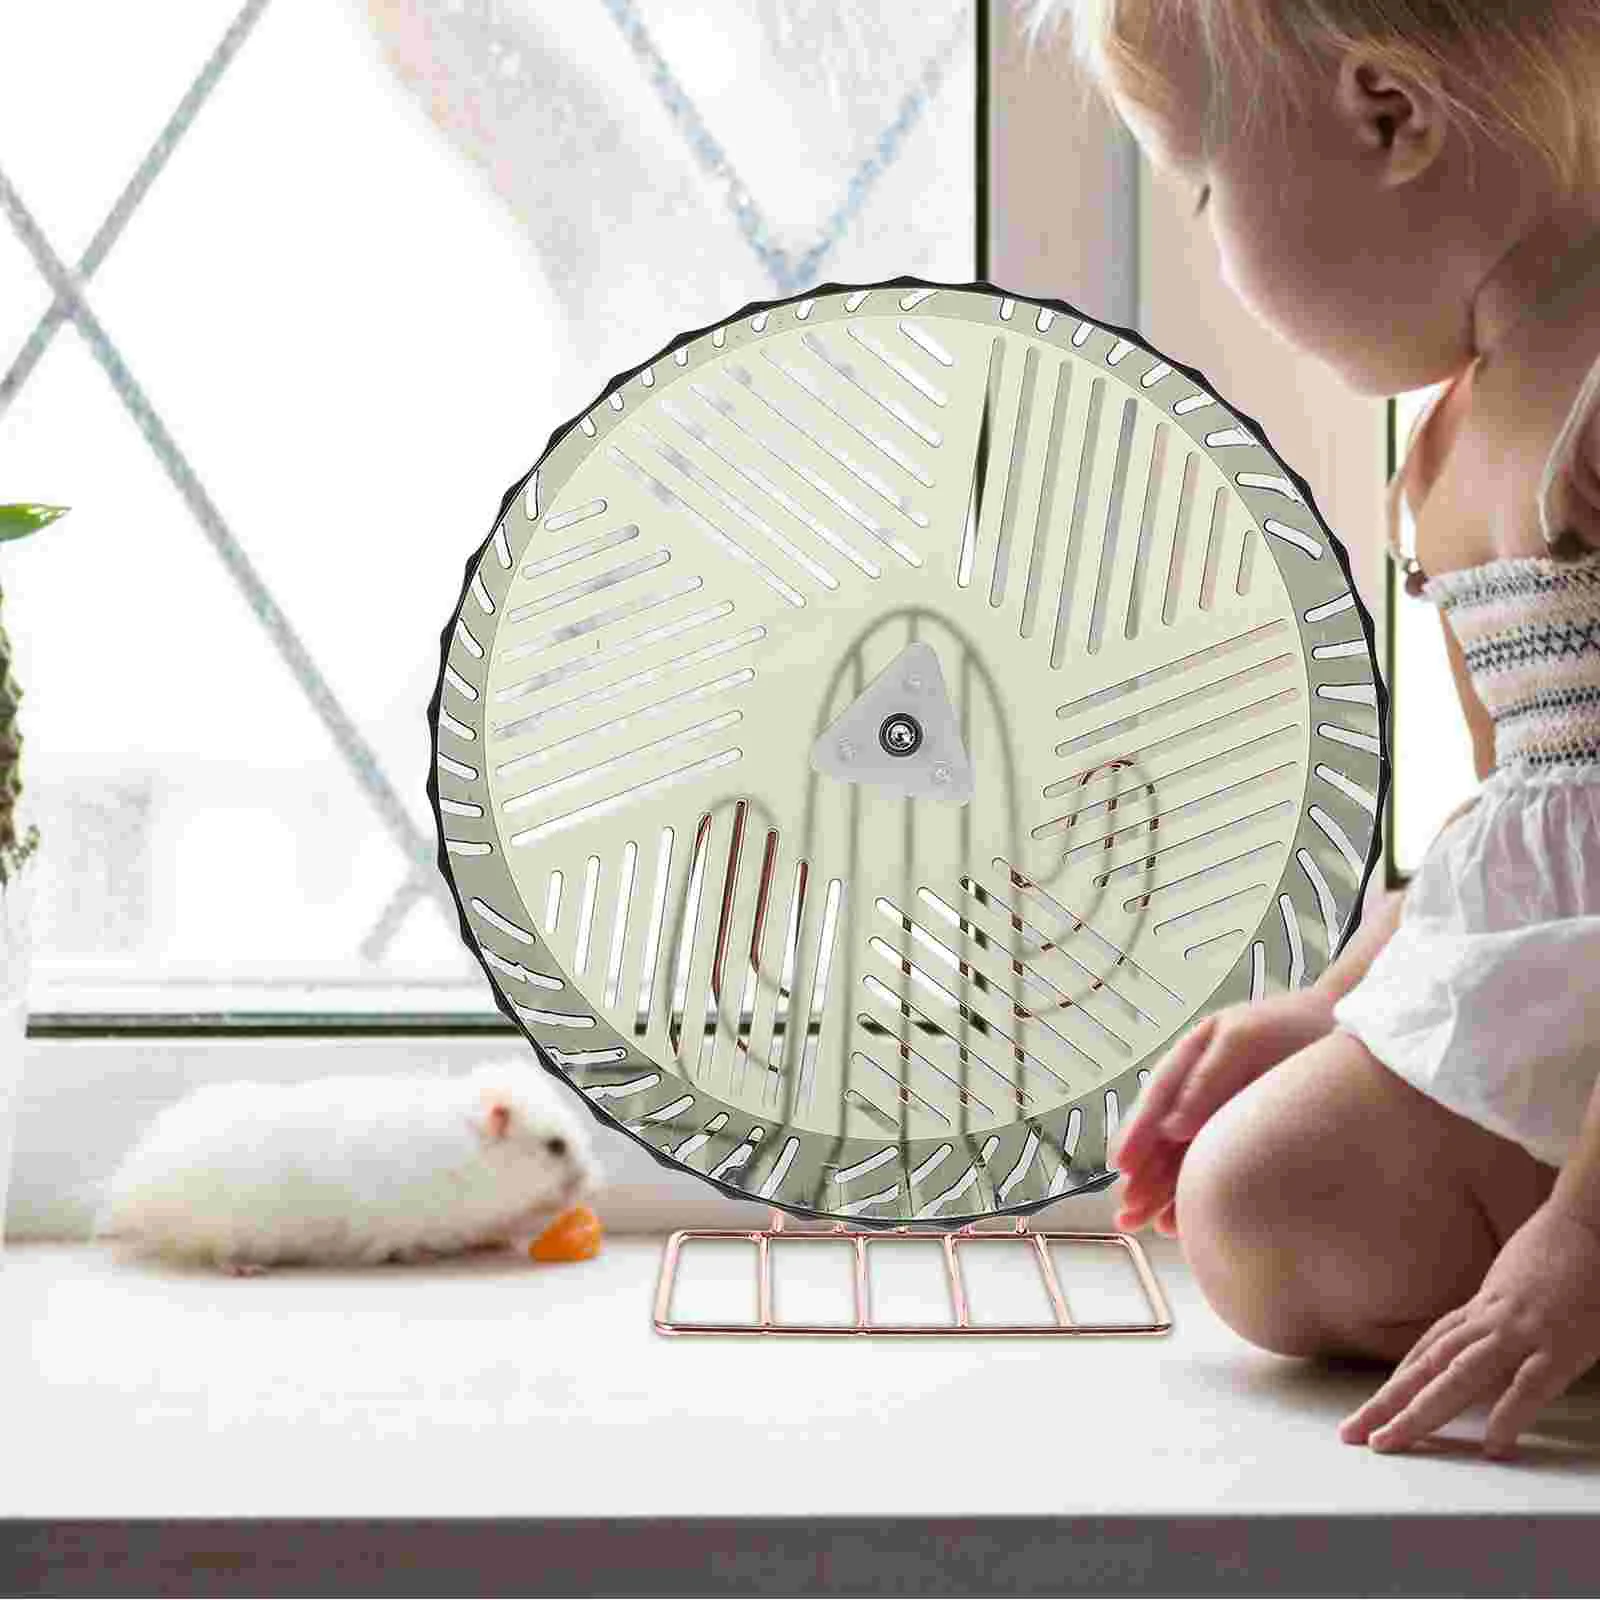 

Wheel Hamster Silent Exercise Chinchilla Inch Quiet Running Rat Hedgehog Animal Wheels Saucer Toy Cage Exercising Gerbil Animals